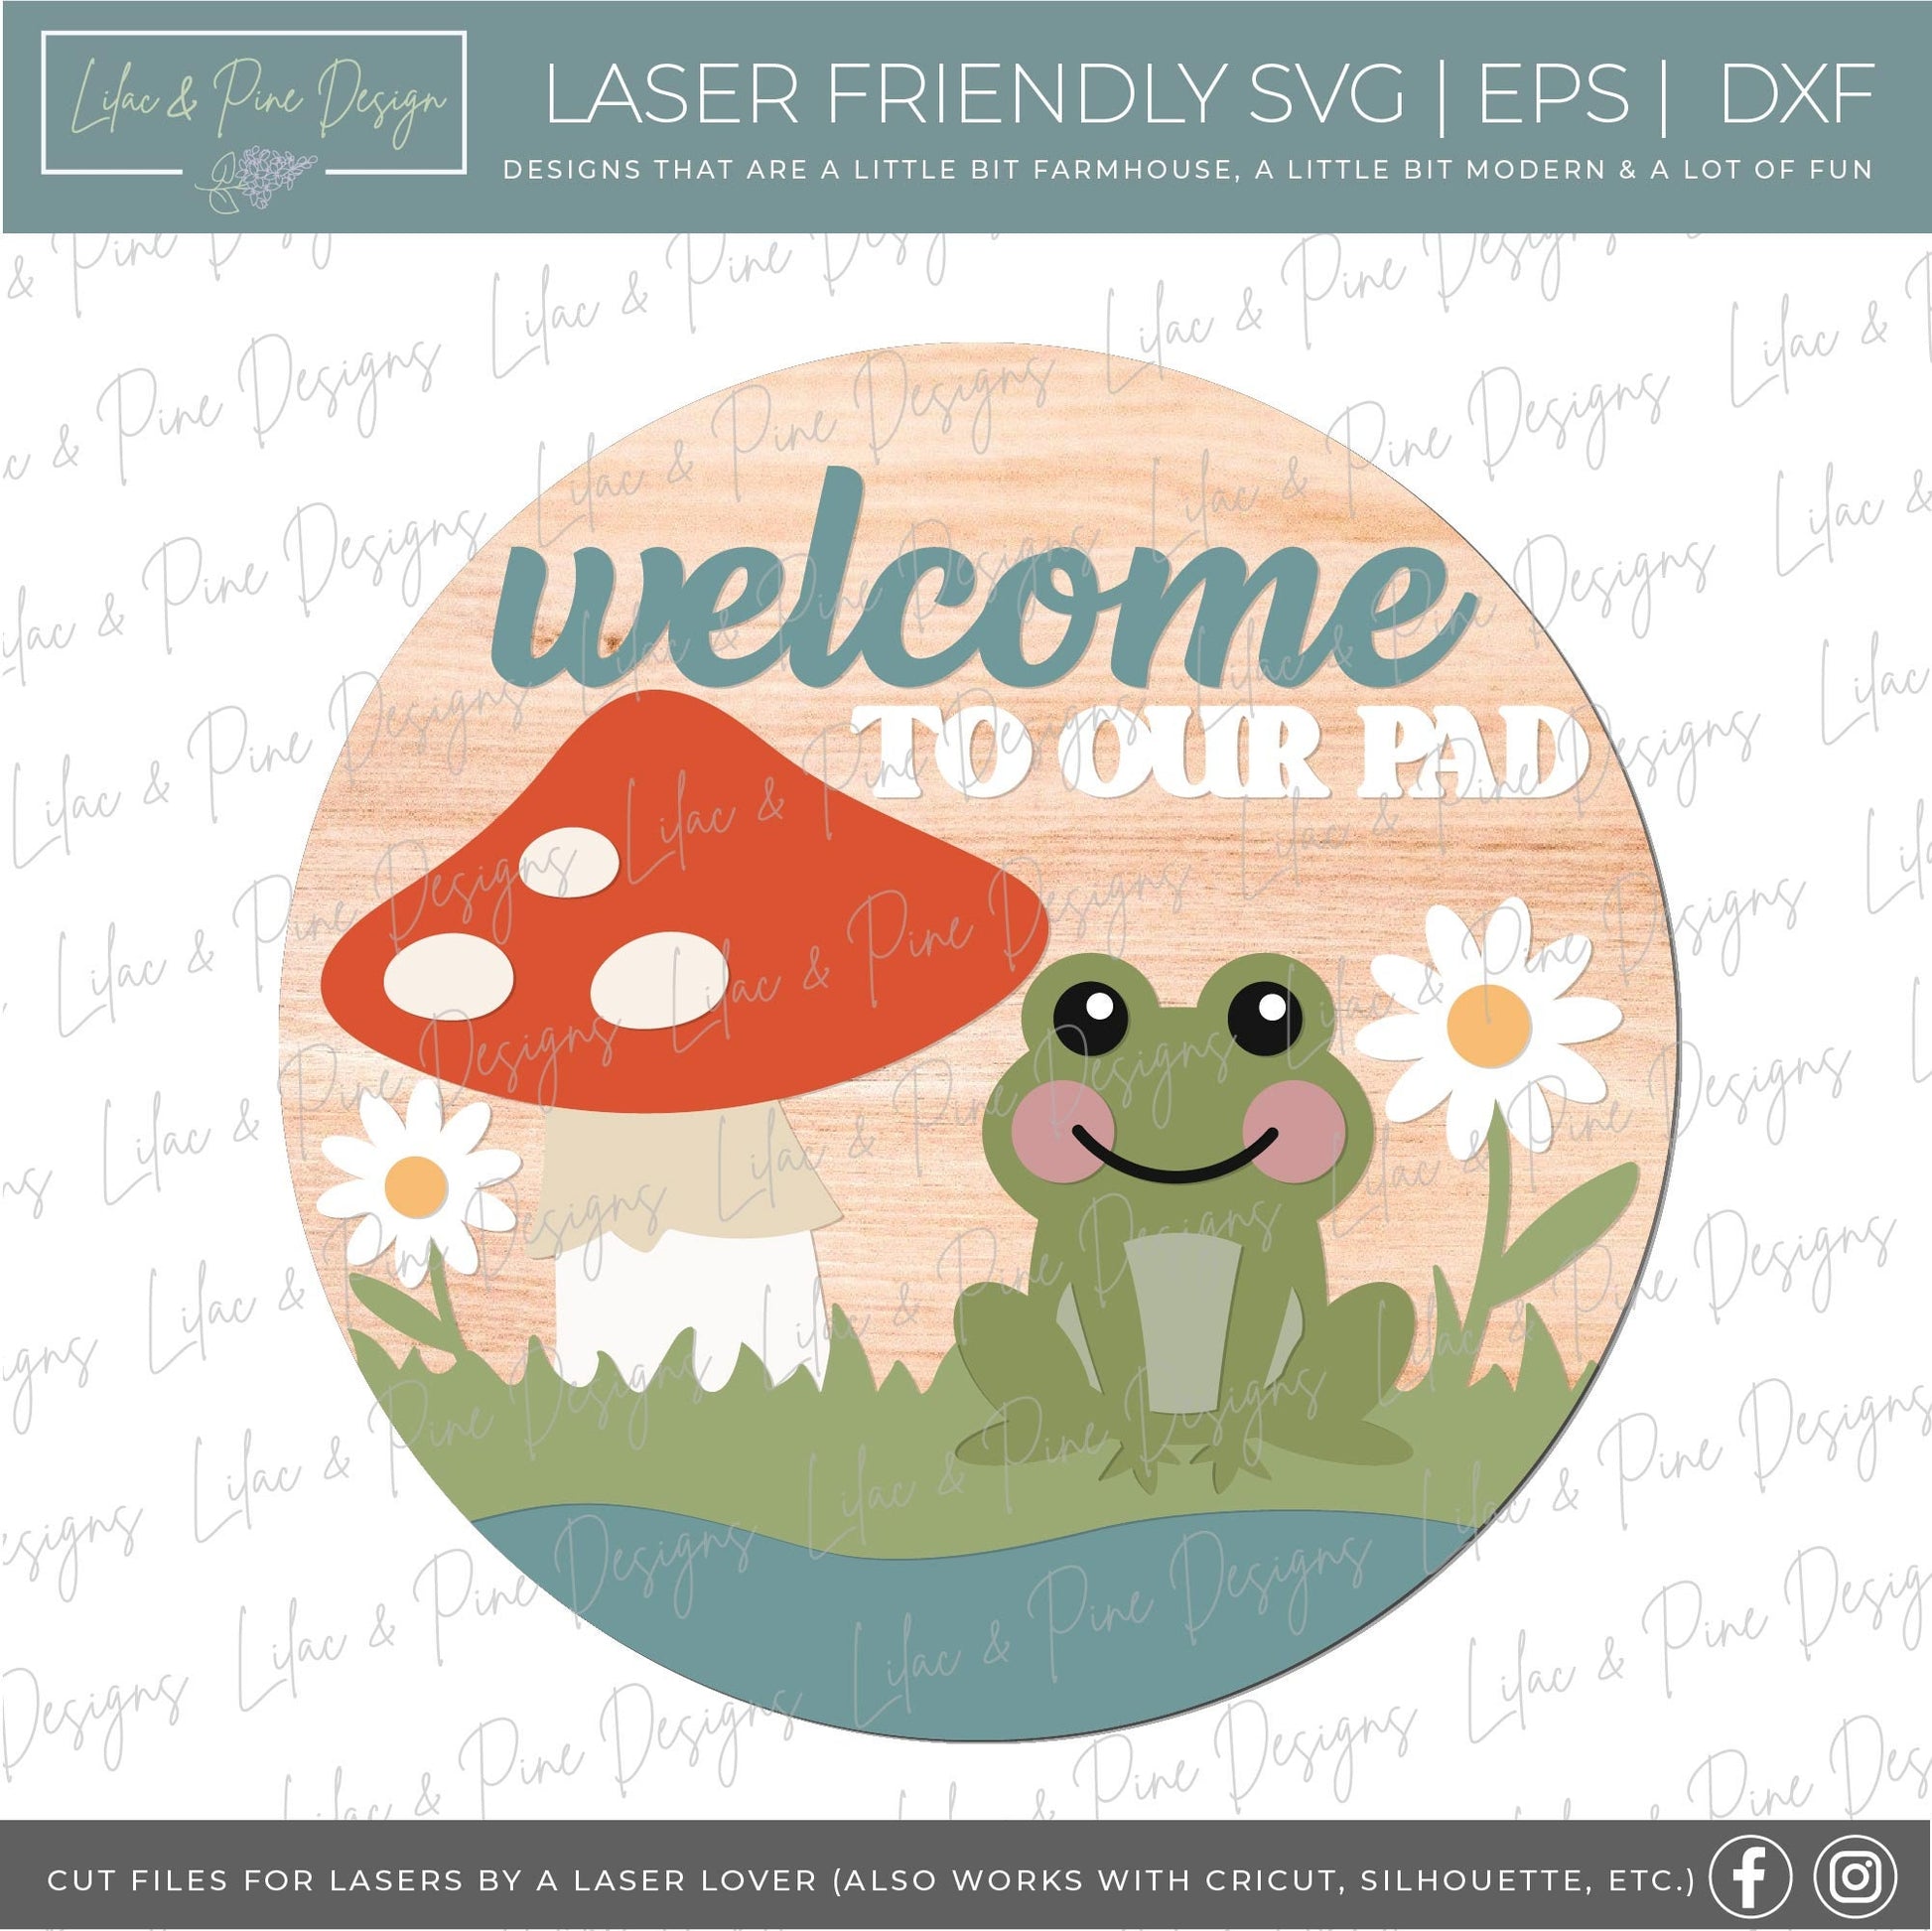 Frog welcome sign SVG, Mushroom door hanger svg, Welcome to our Pad sign, summer sign, Daisy welcome sign, Glowforge Svg, laser cut file